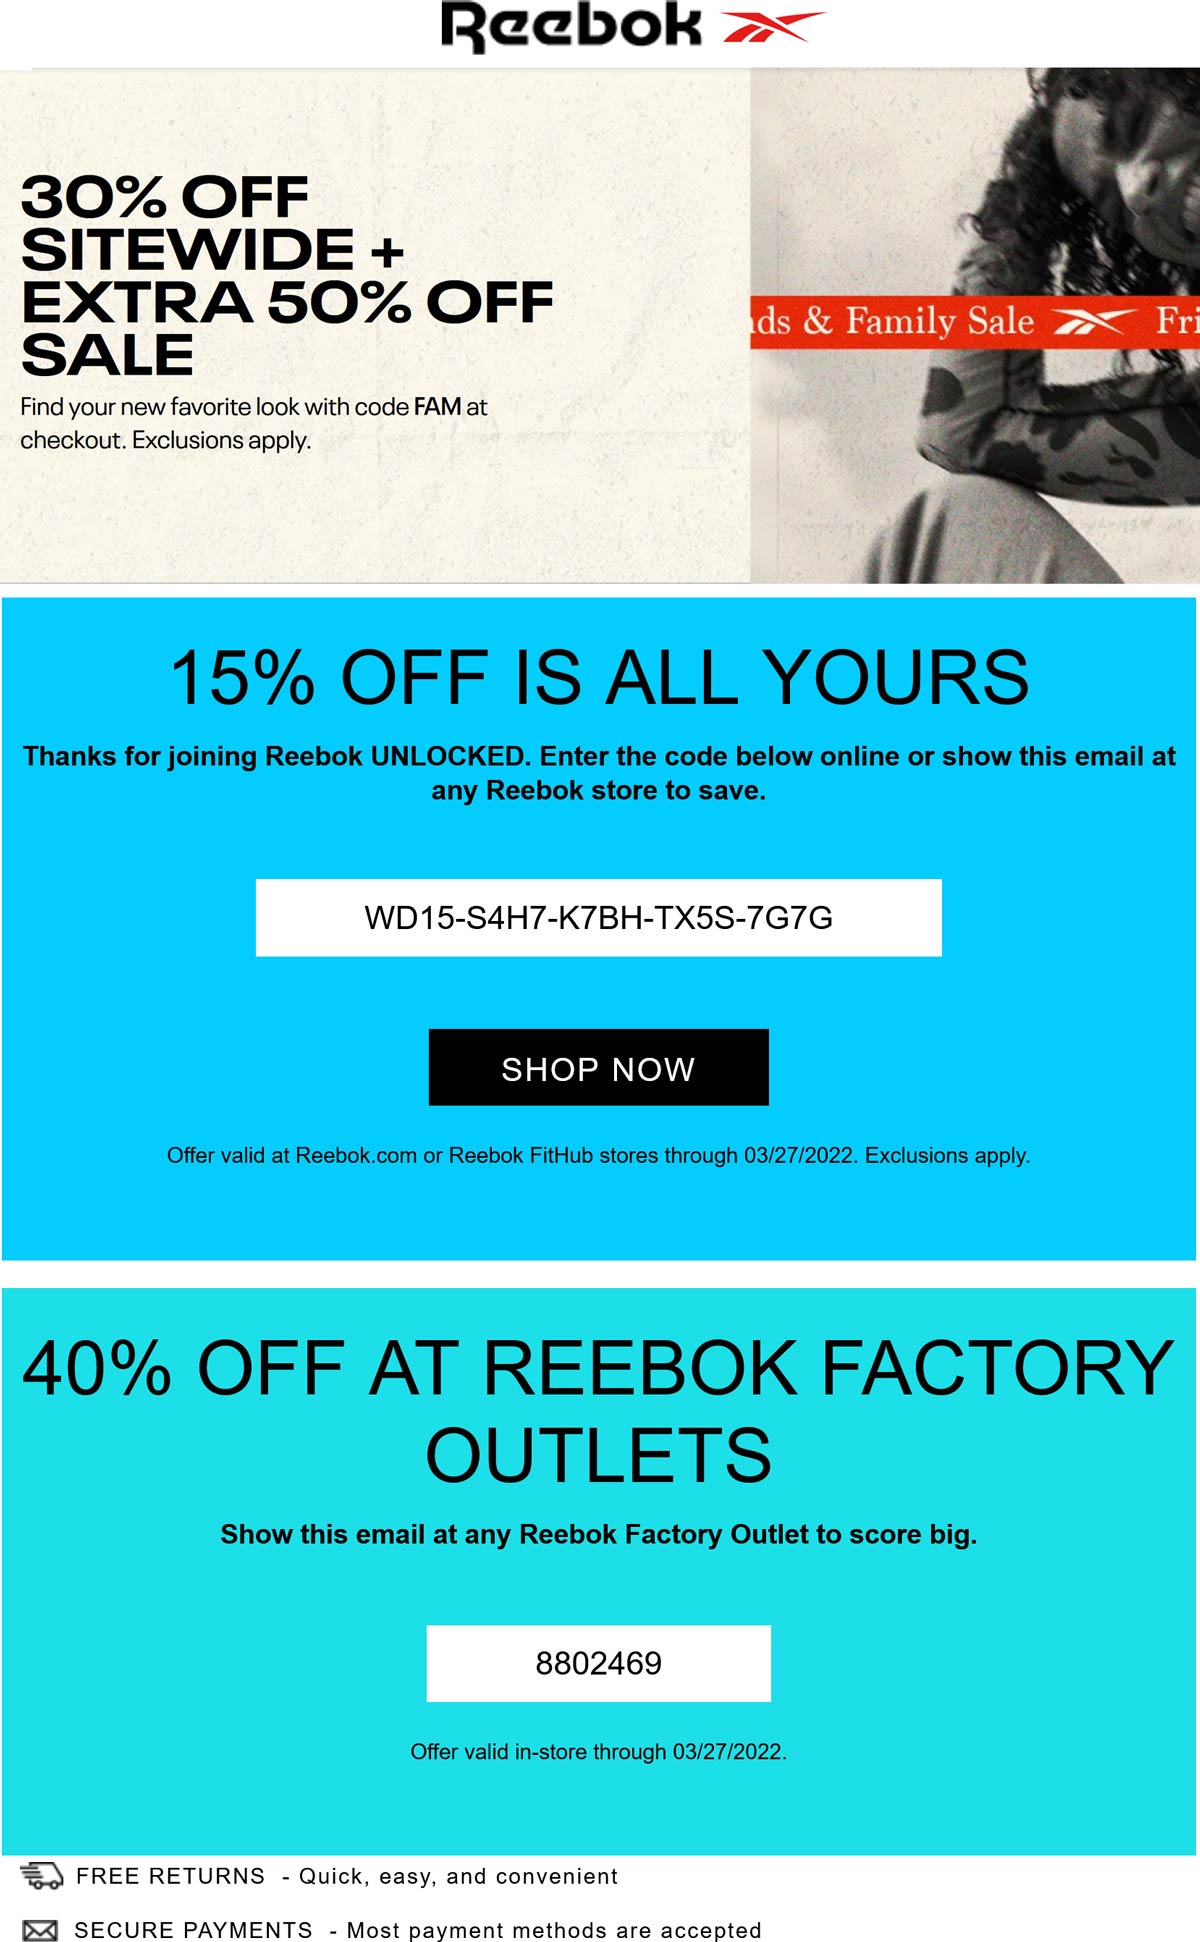 Reebok stores Coupon  30% off everything & 50% off sale items at Reebok via promo code FAM #reebok 